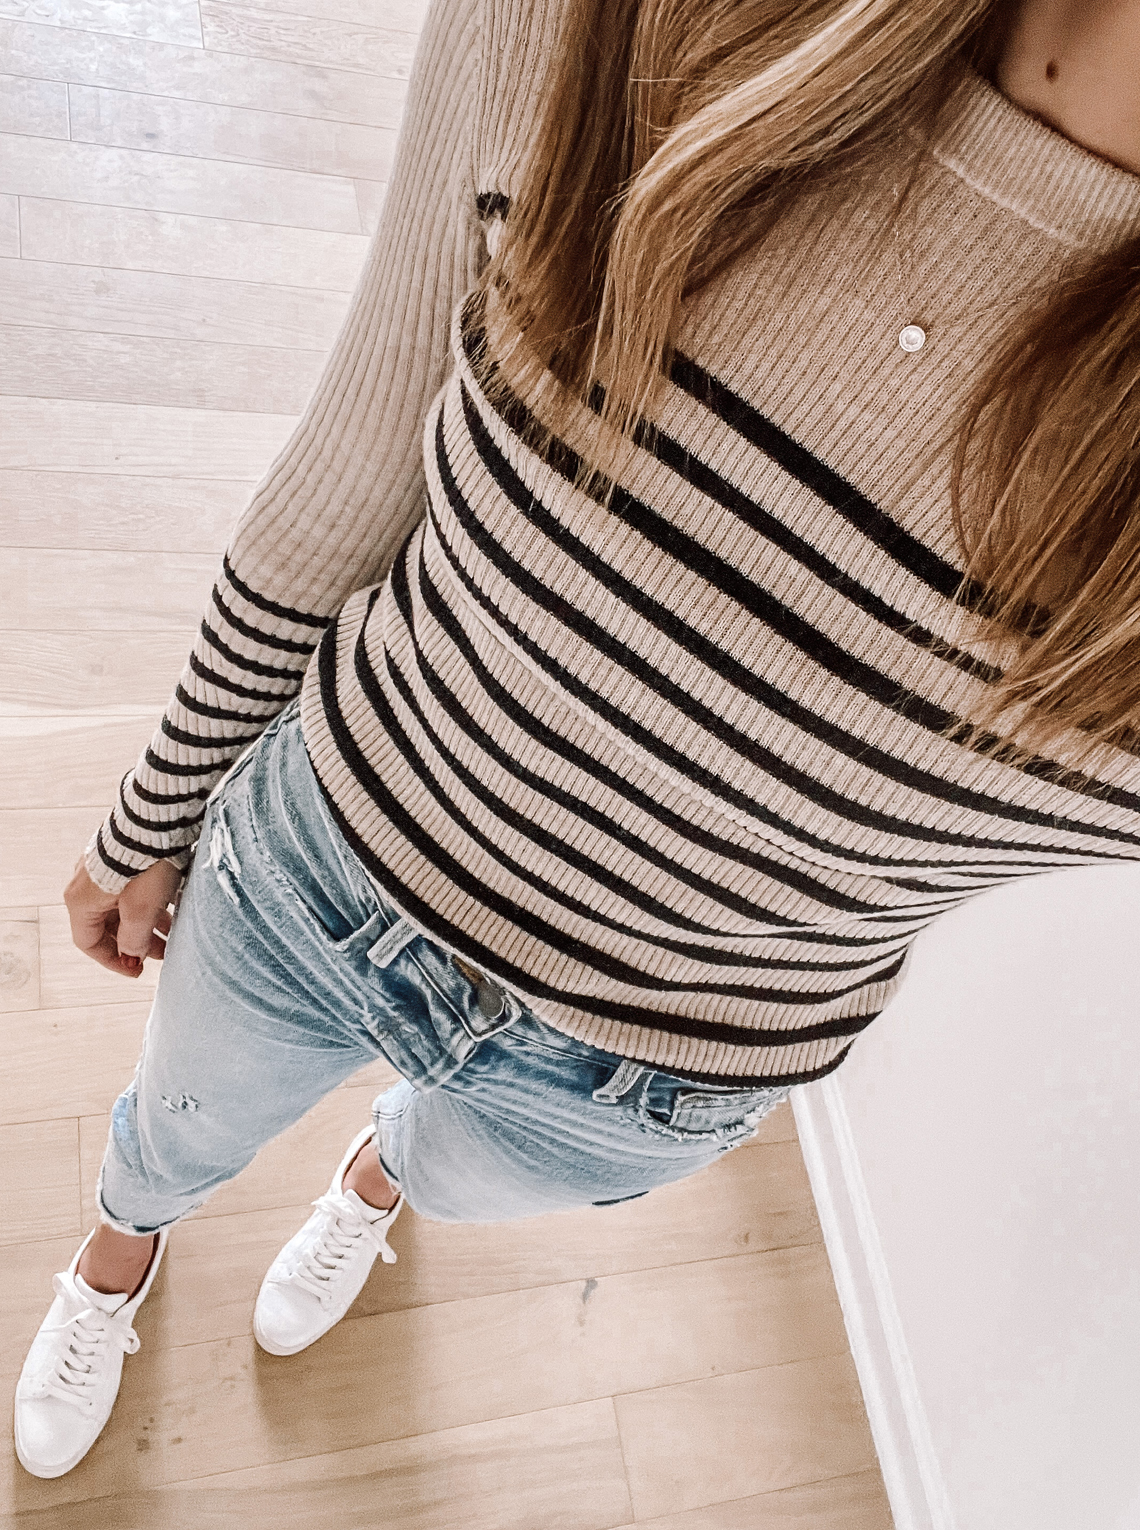 Fashion Jackson Wearing Rag and Bone Stripe Top Jeans White Sneakers Outfit